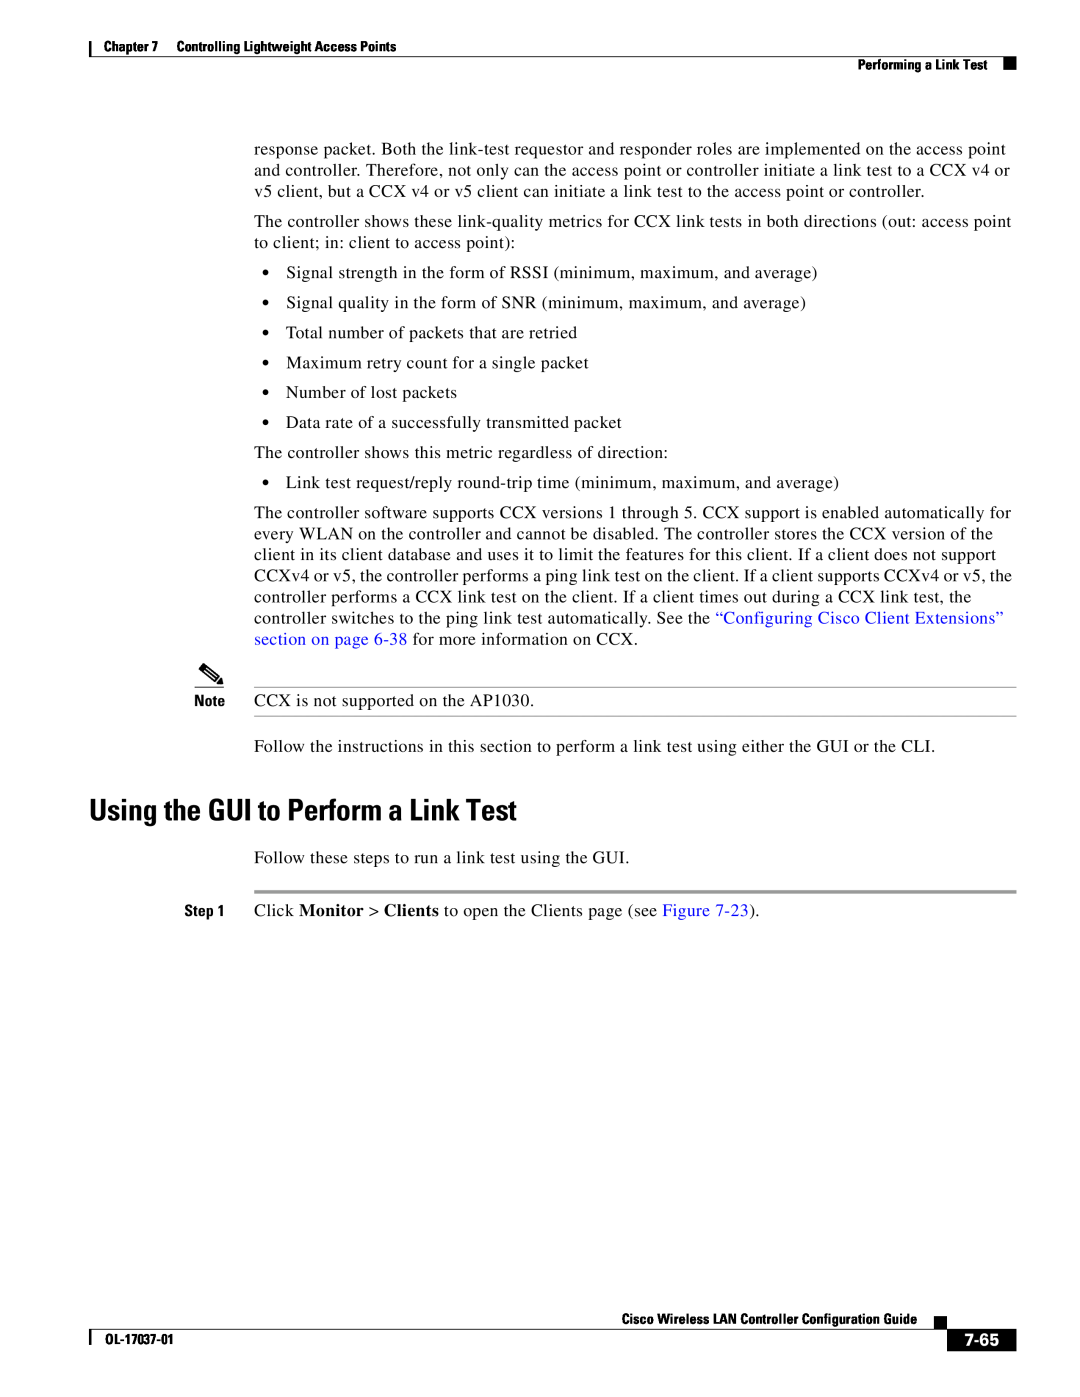 Cisco Systems OL-17037-01 manual Using the GUI to Perform a Link Test, 7-65 